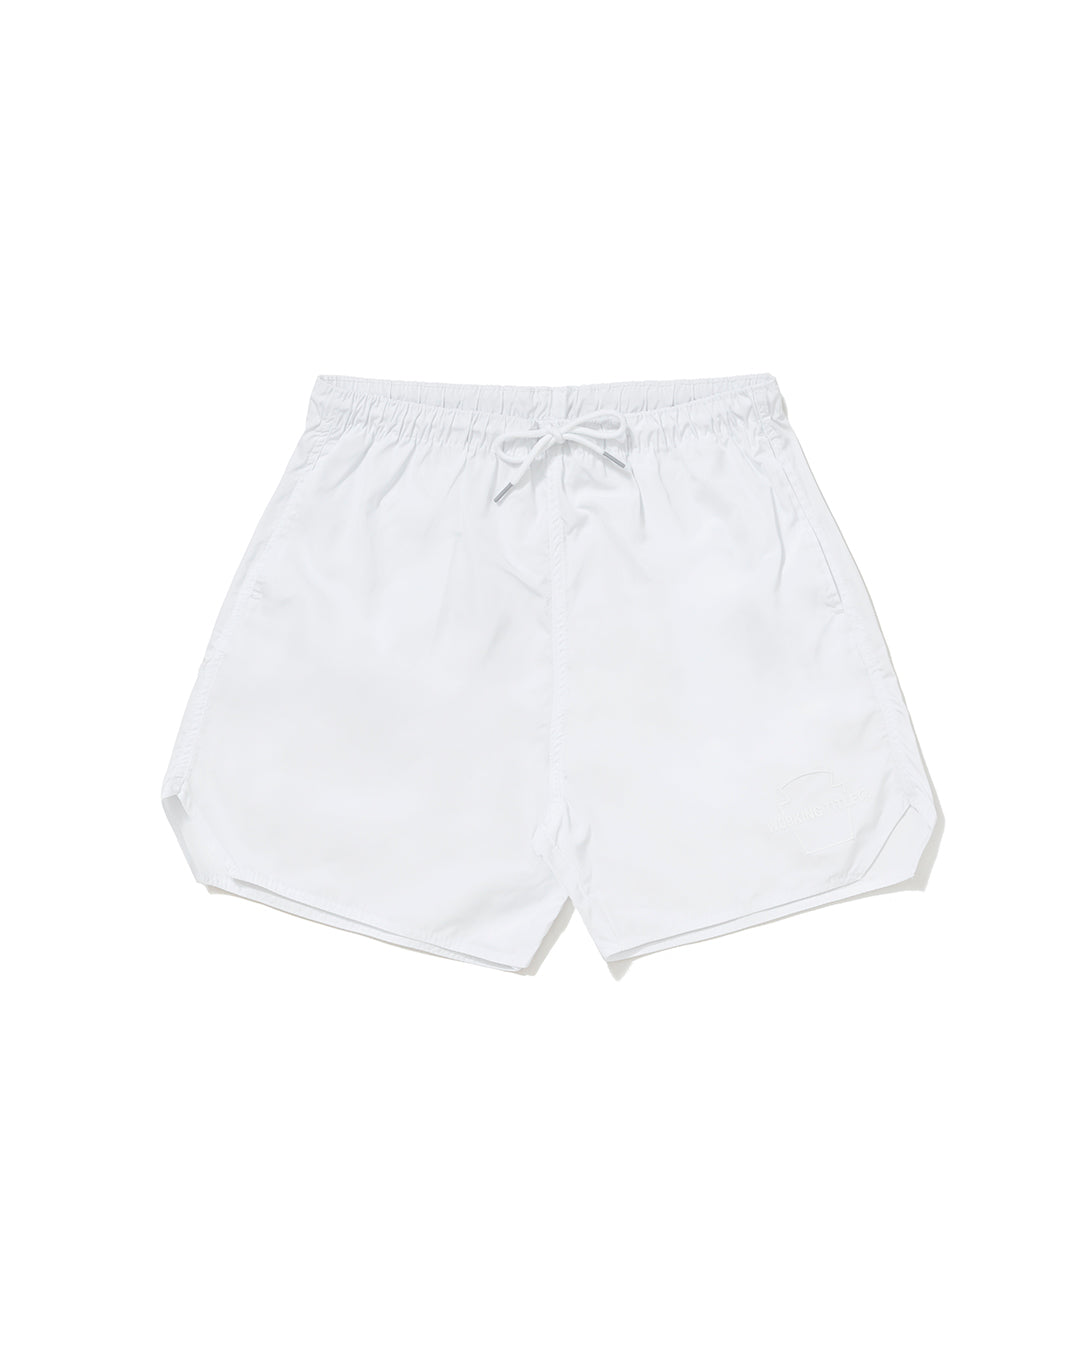 HEINZ x WT® Unstained Shorts